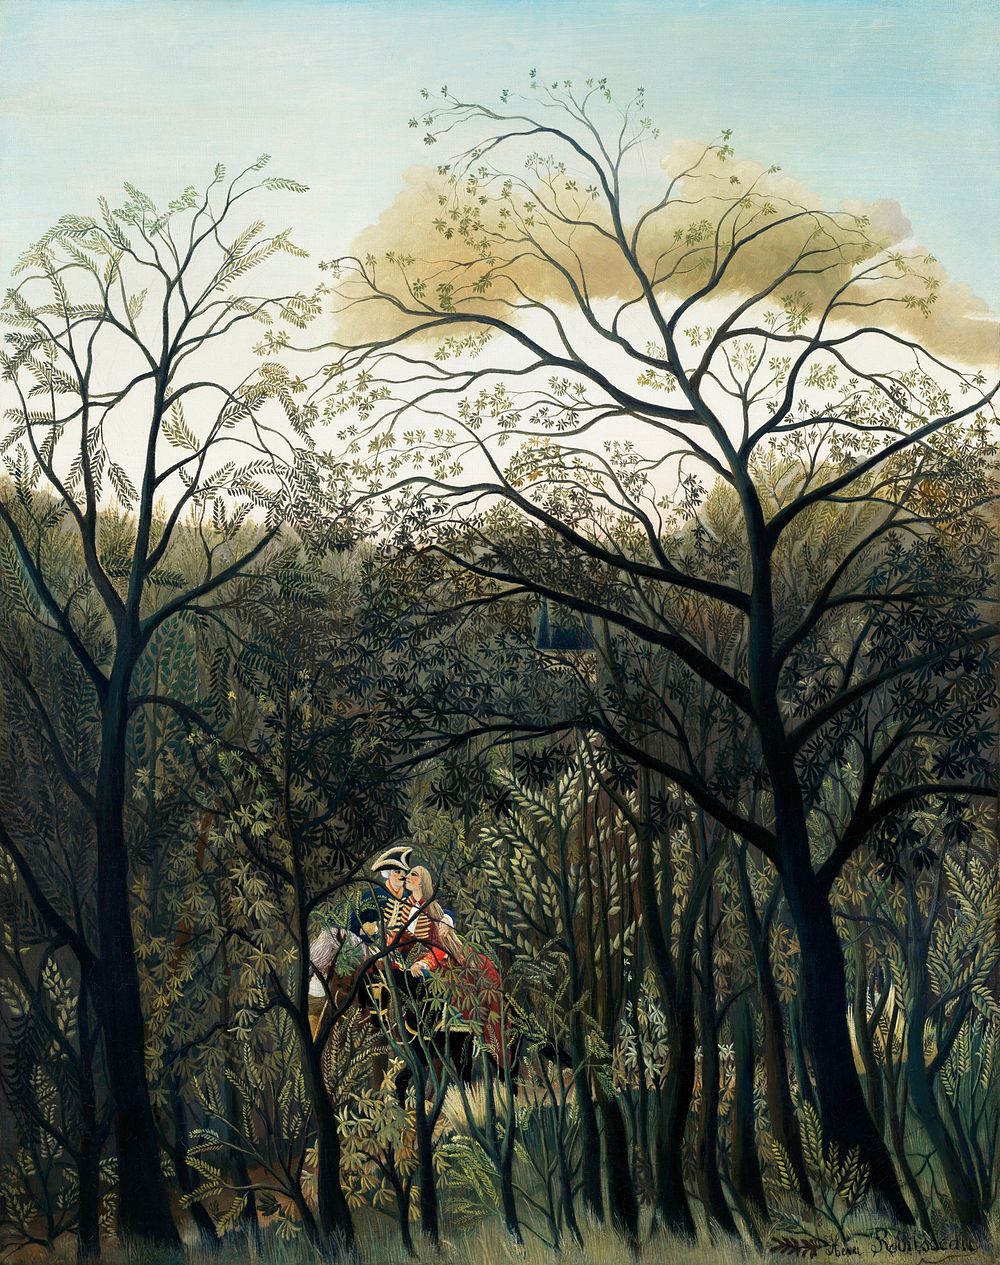 Rendezvous in the Forest (1889) by Henri Rousseau. Original from The National Gallery of Art. Digitally enhanced by rawpixel.